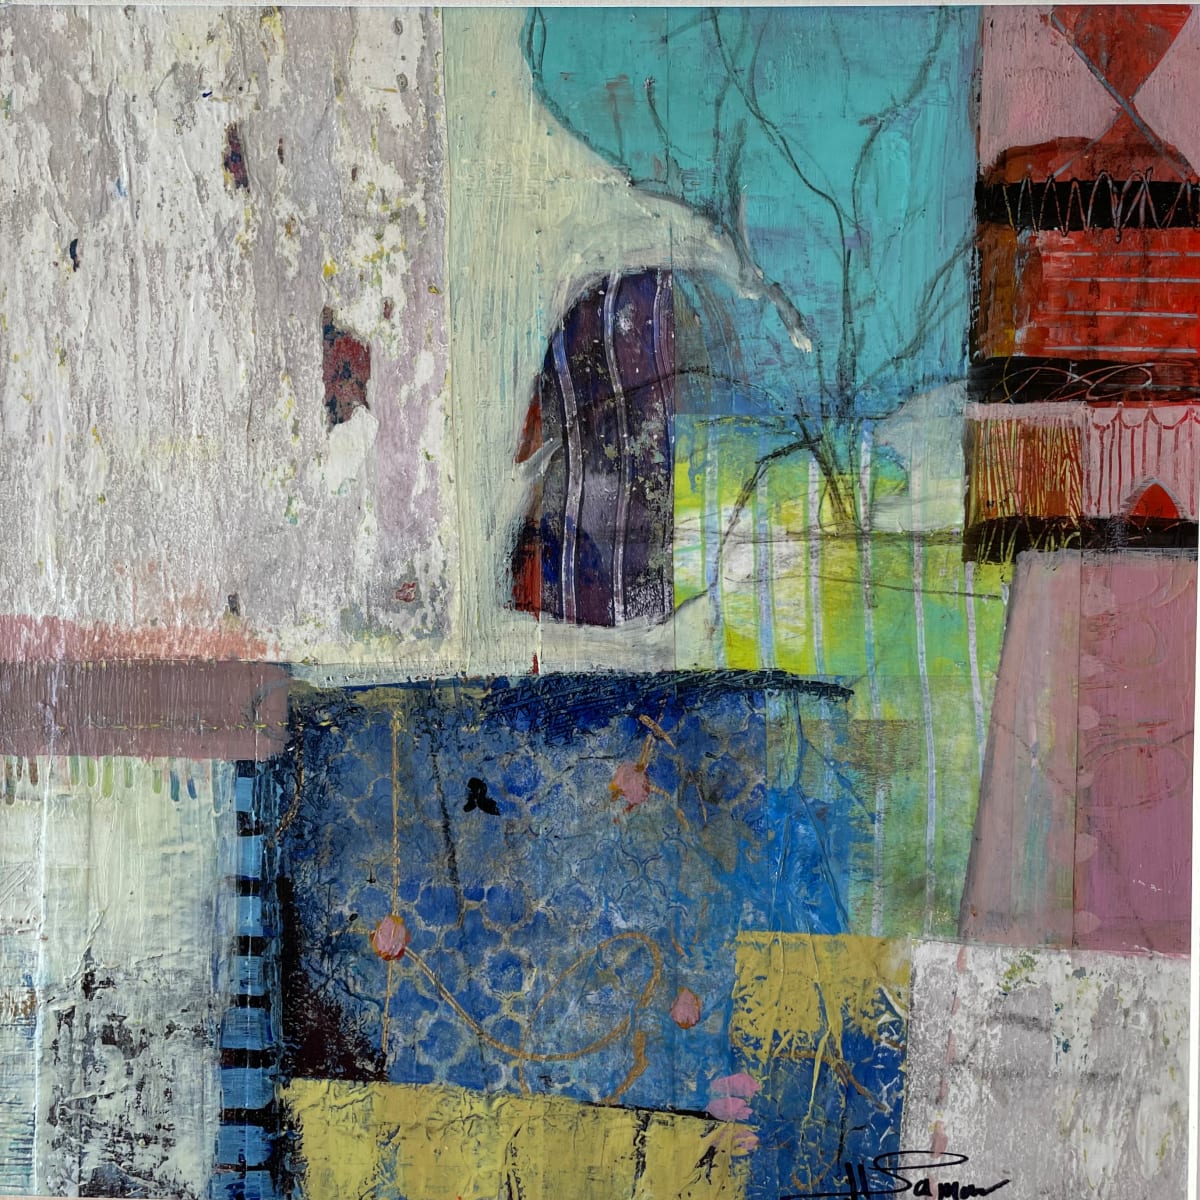 Oriental Glimpses - 456  Image: Mixed Media painting, with White Matt Board.
Framed Size:   45x45cm
Painting size : 30x30cm
Ready to Hang